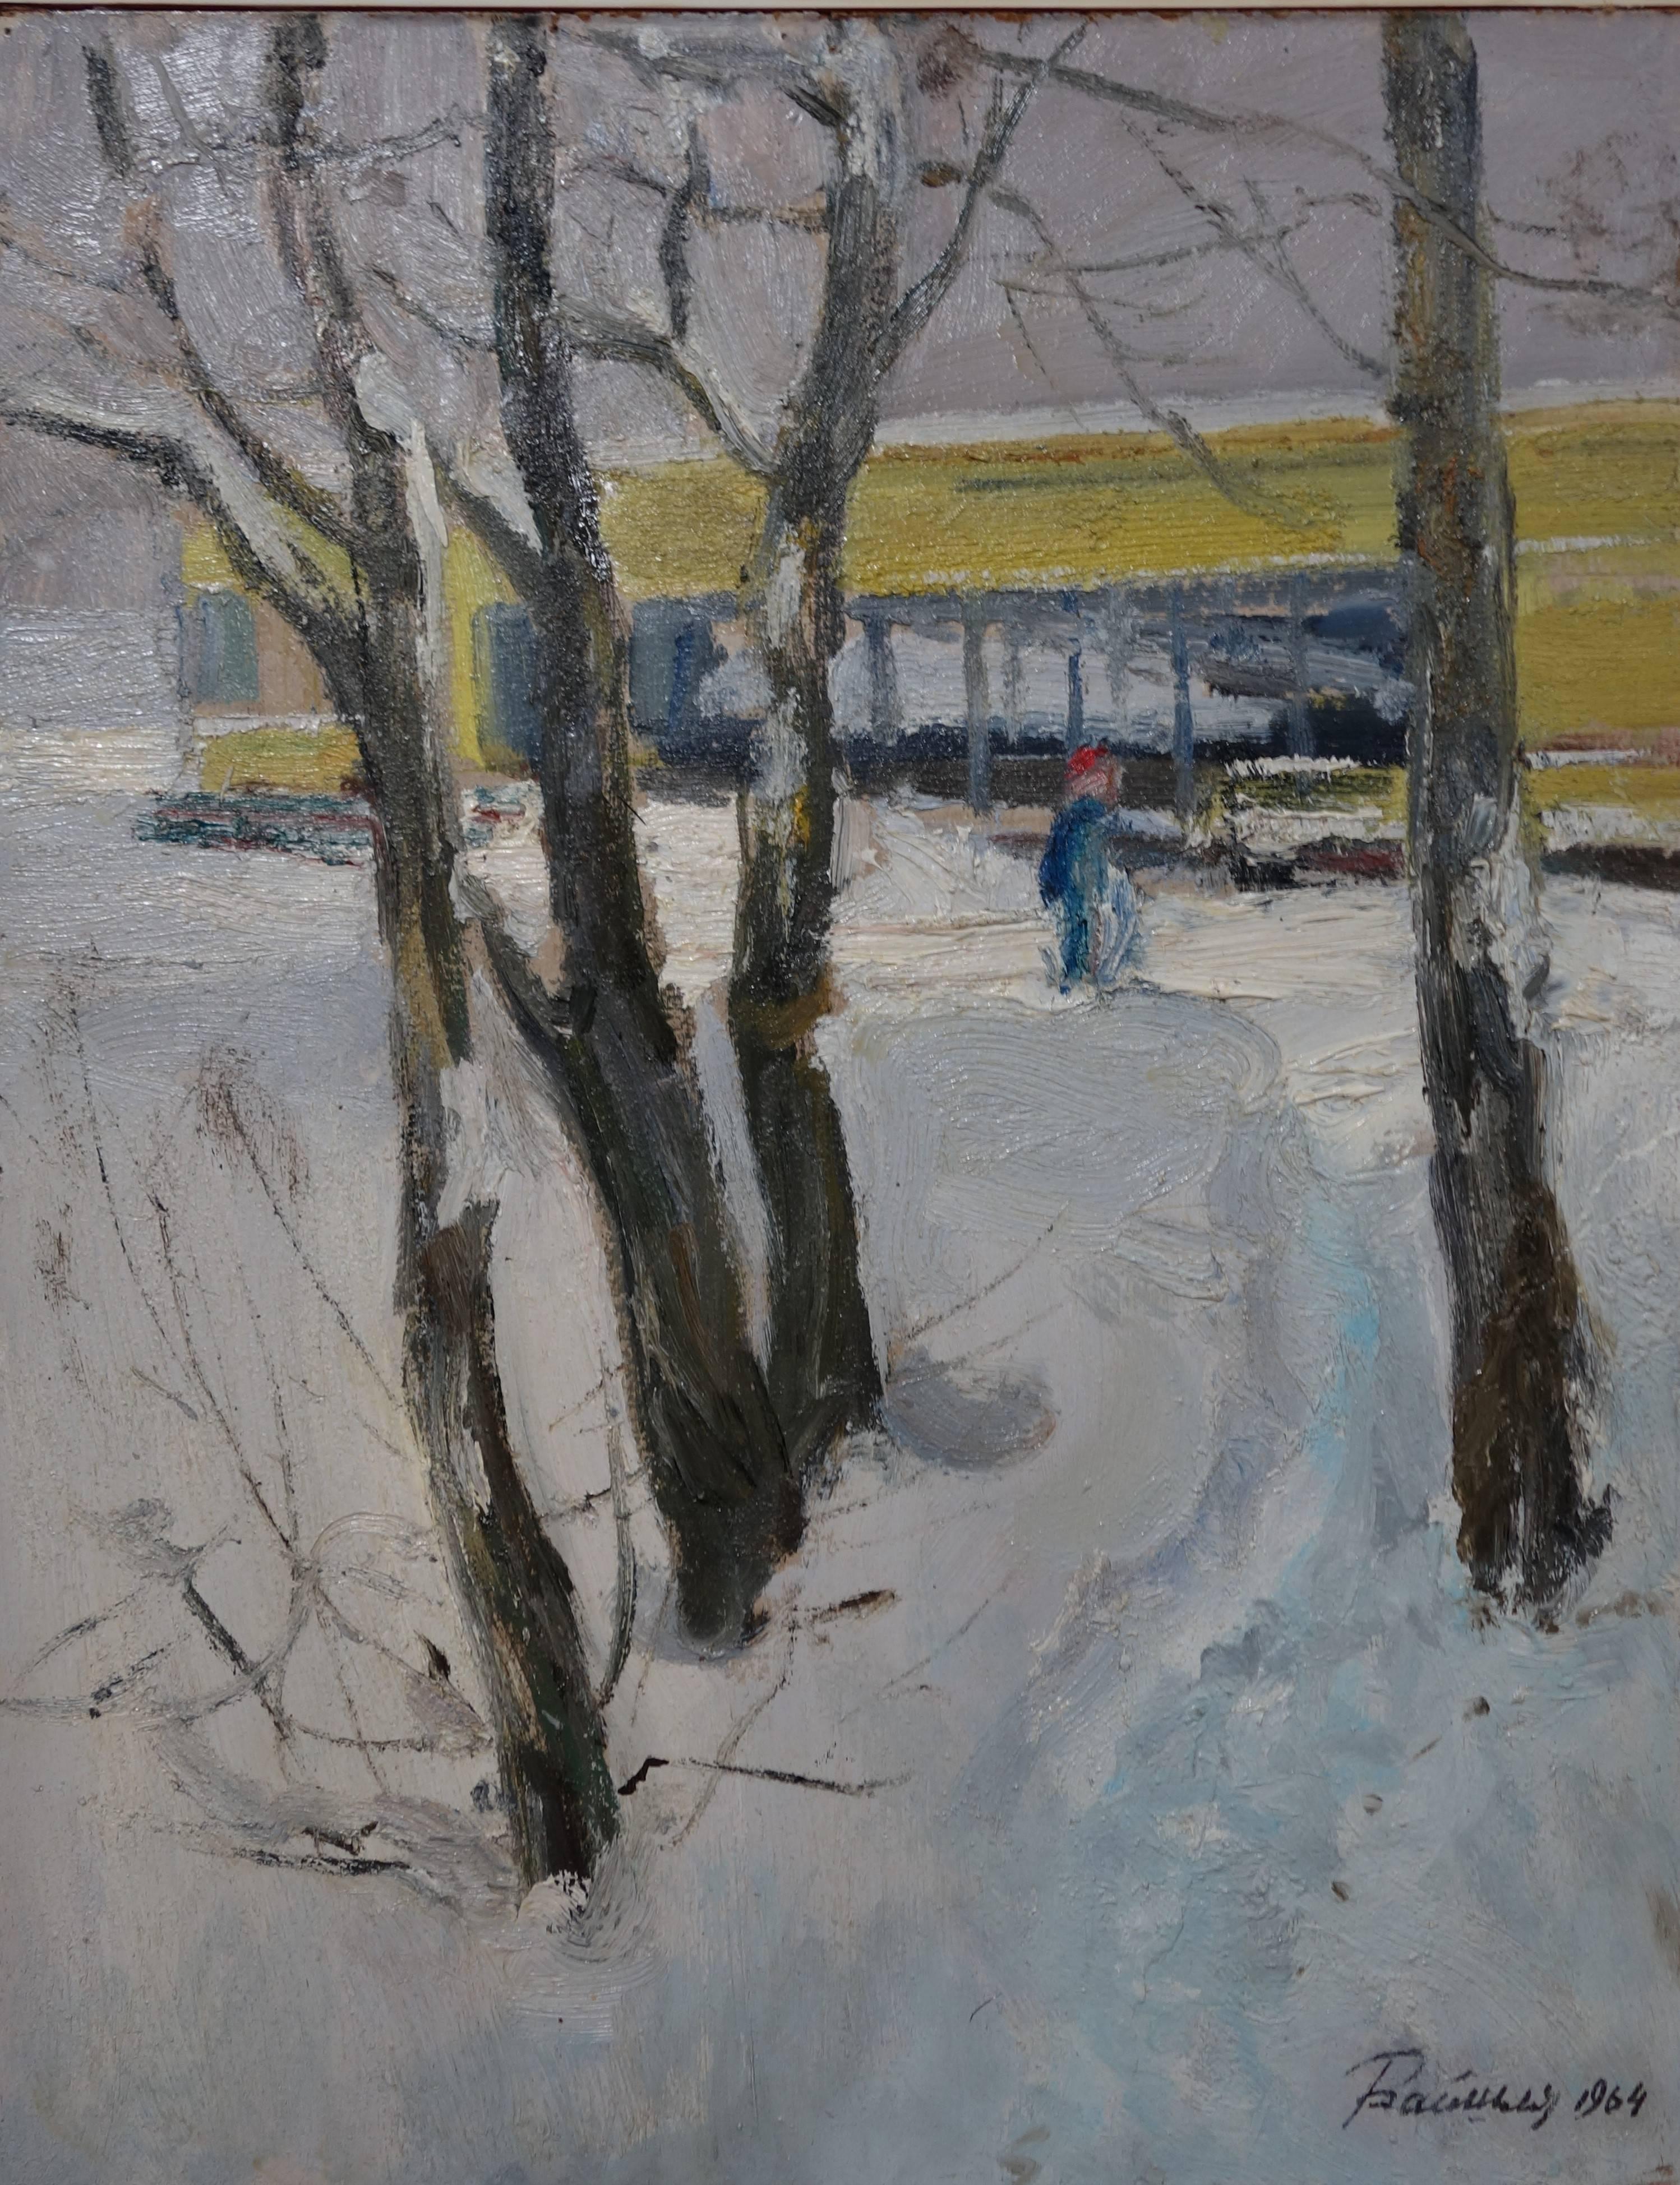 "Yellow house in the snow" Snow, Forest, Winter, White Oil cm. 39 x 50 1964